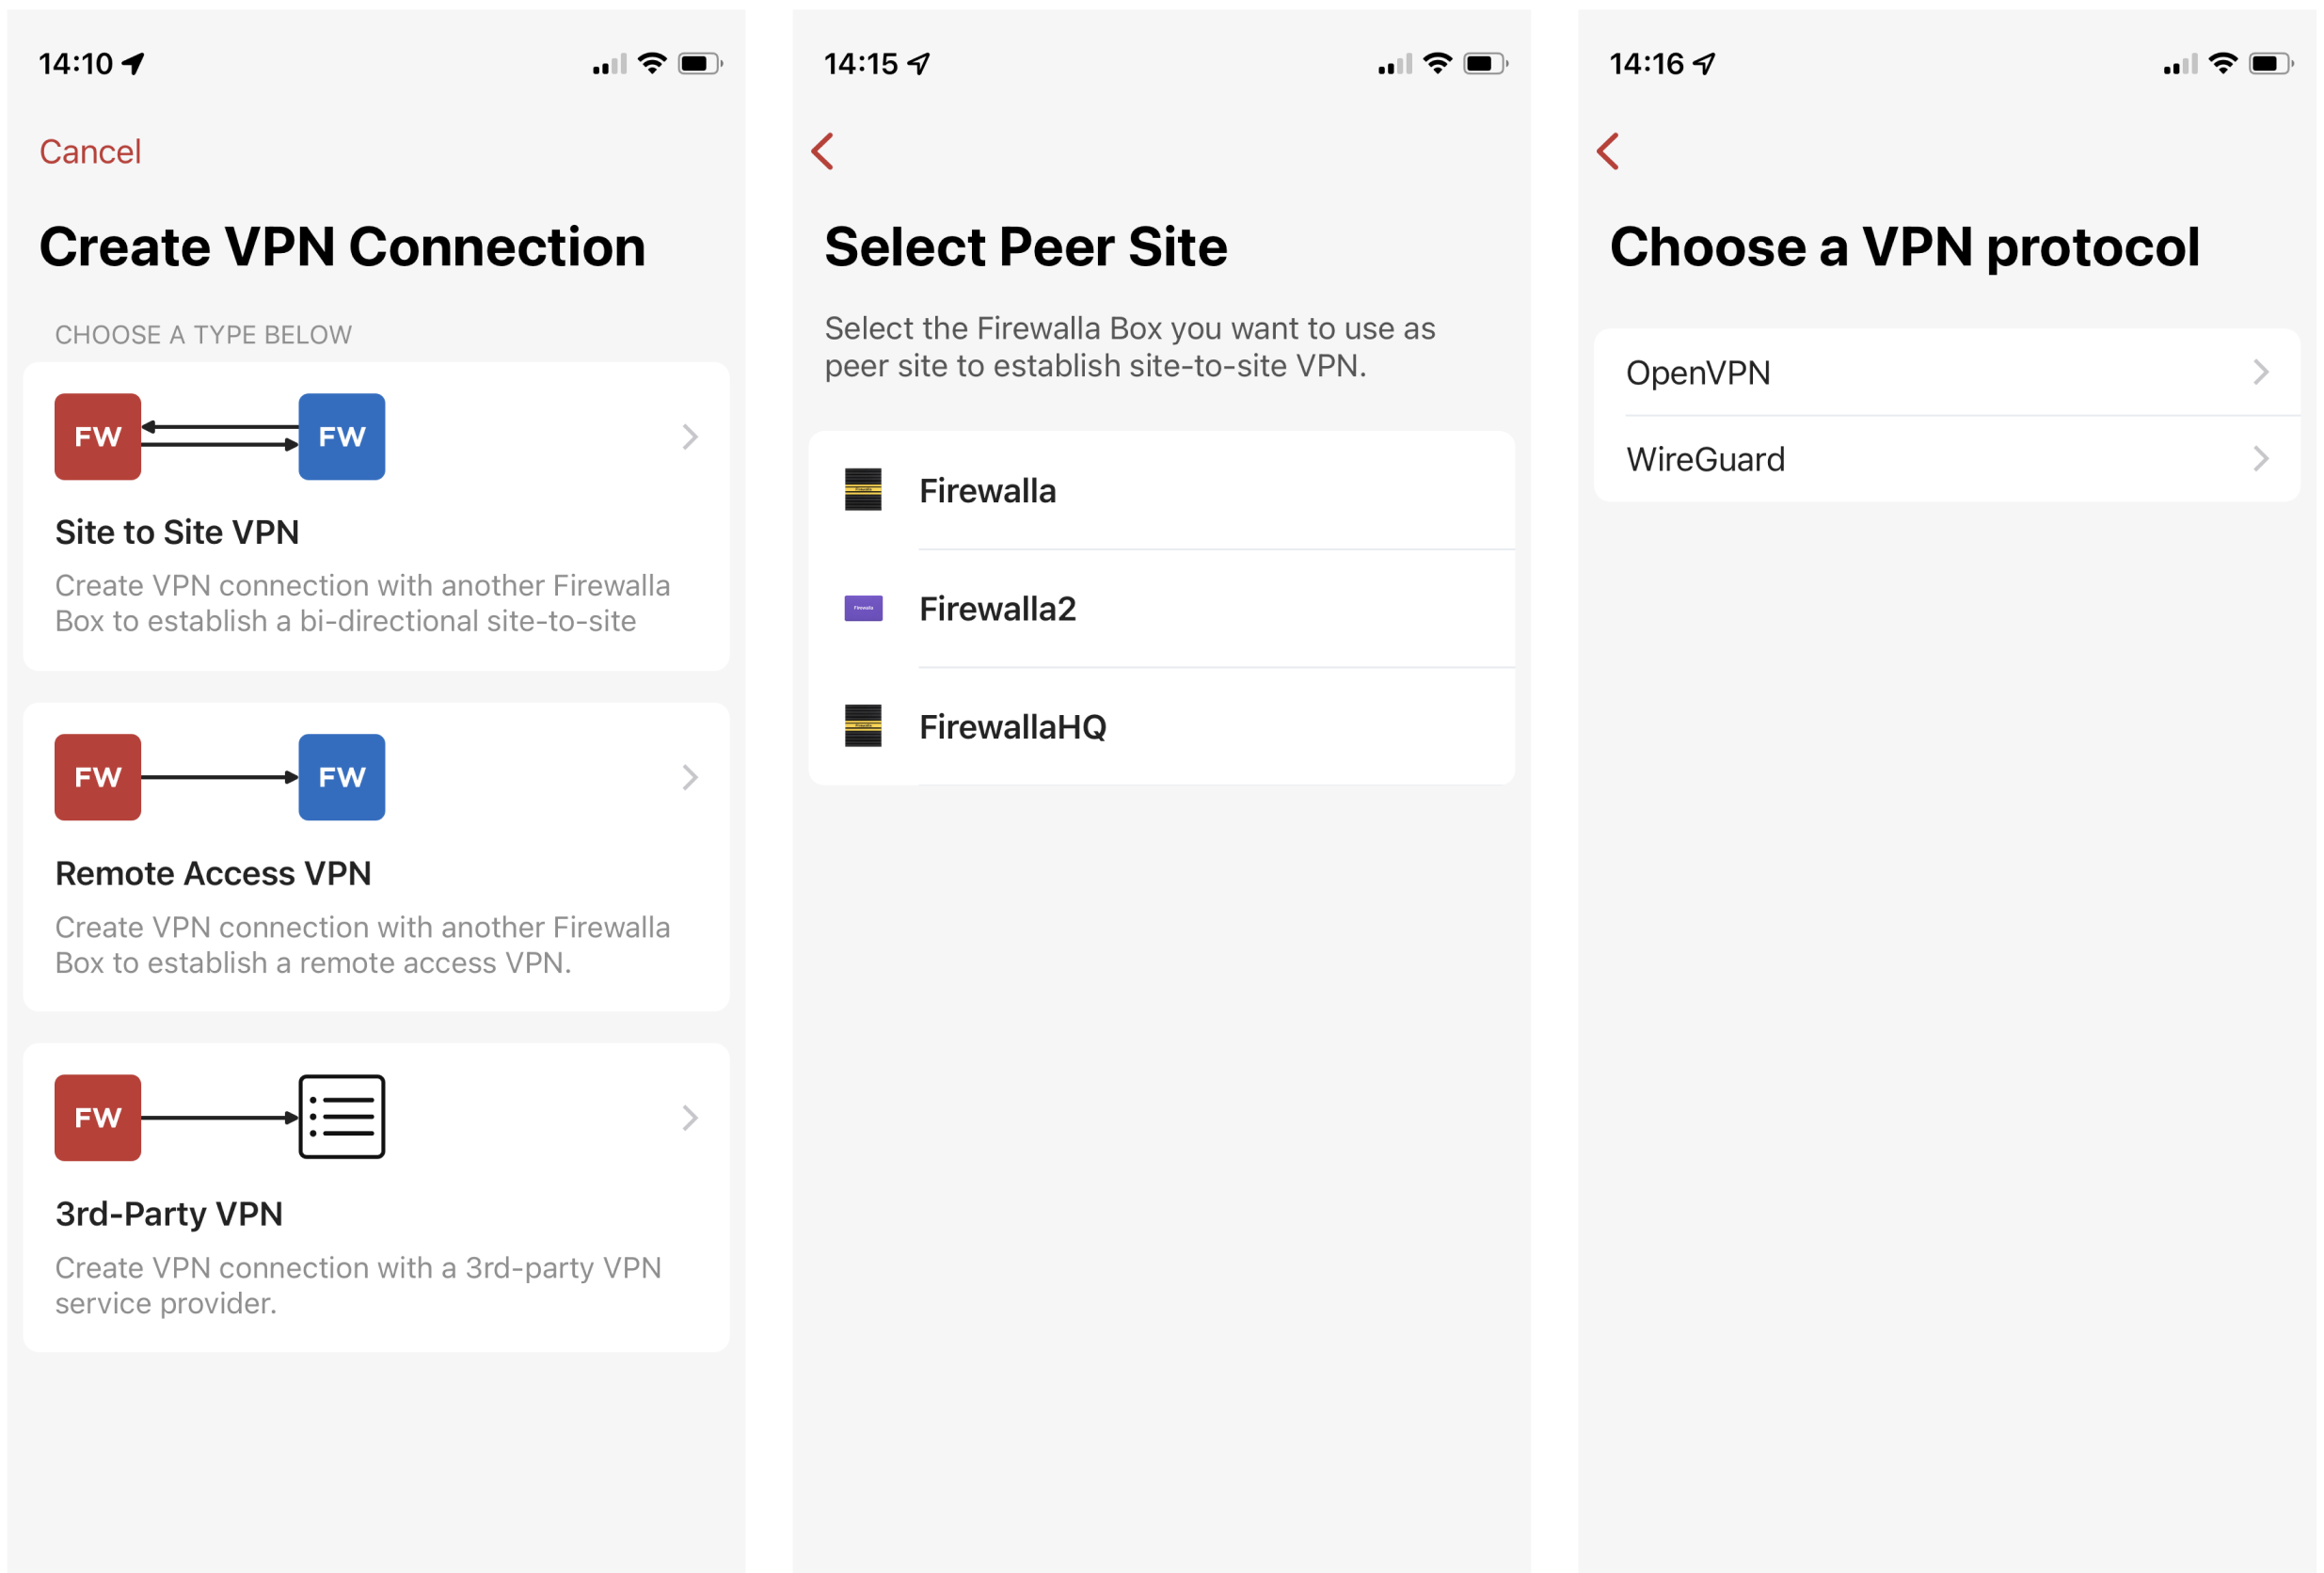  Secure any two Firewalla boxes using site-to-site VPN. Select your peer site and choose Wireguard VPN.